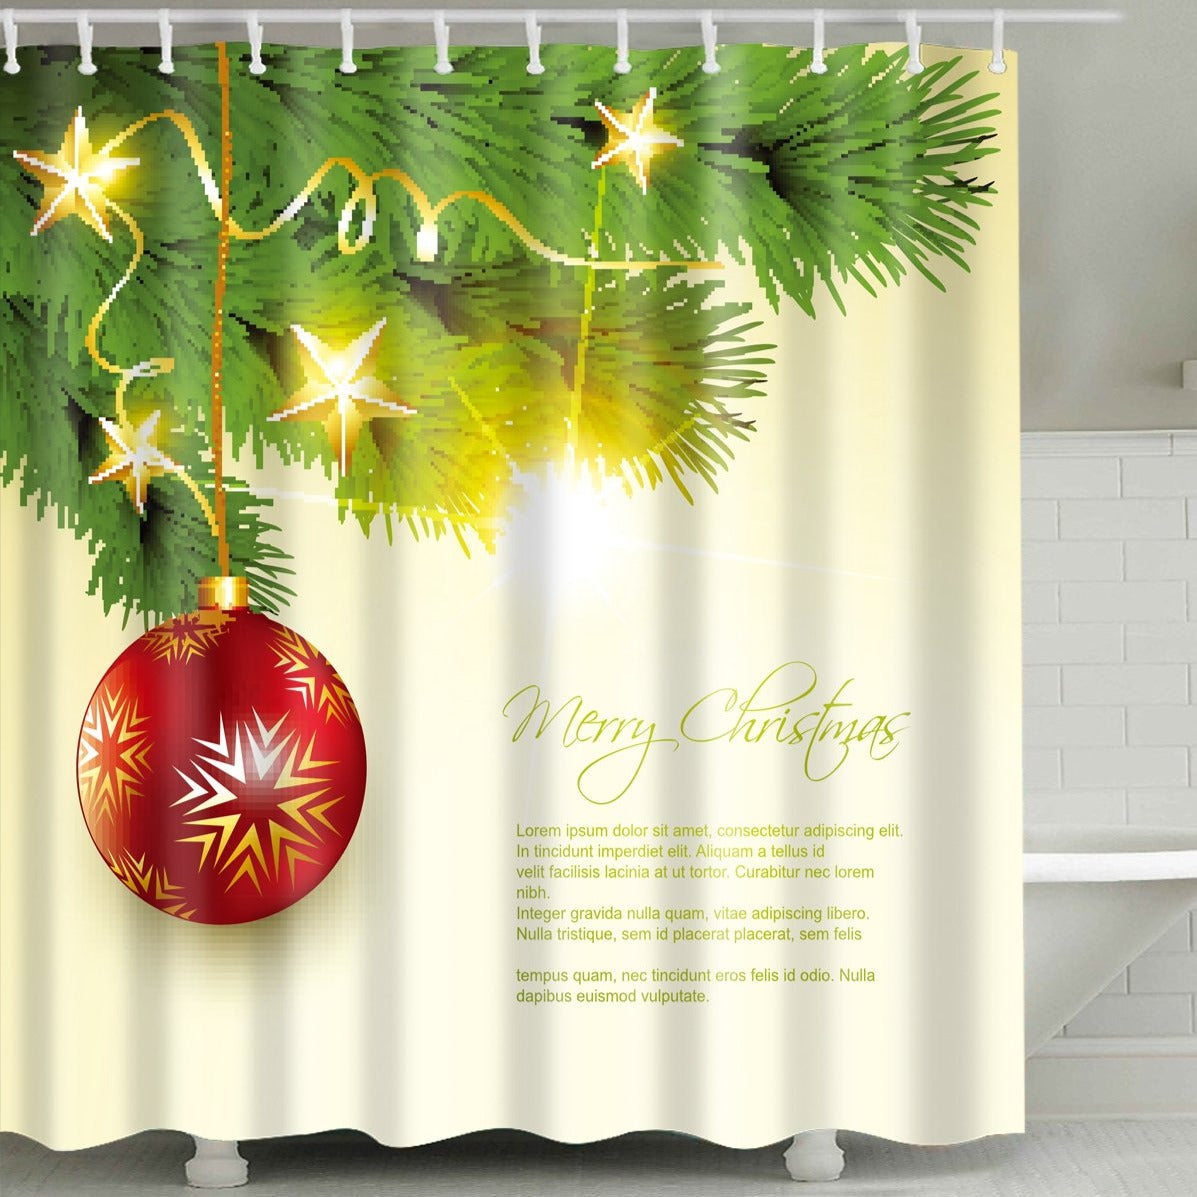 Happy Morning Sunshine Christmas Quotes Shower Curtain